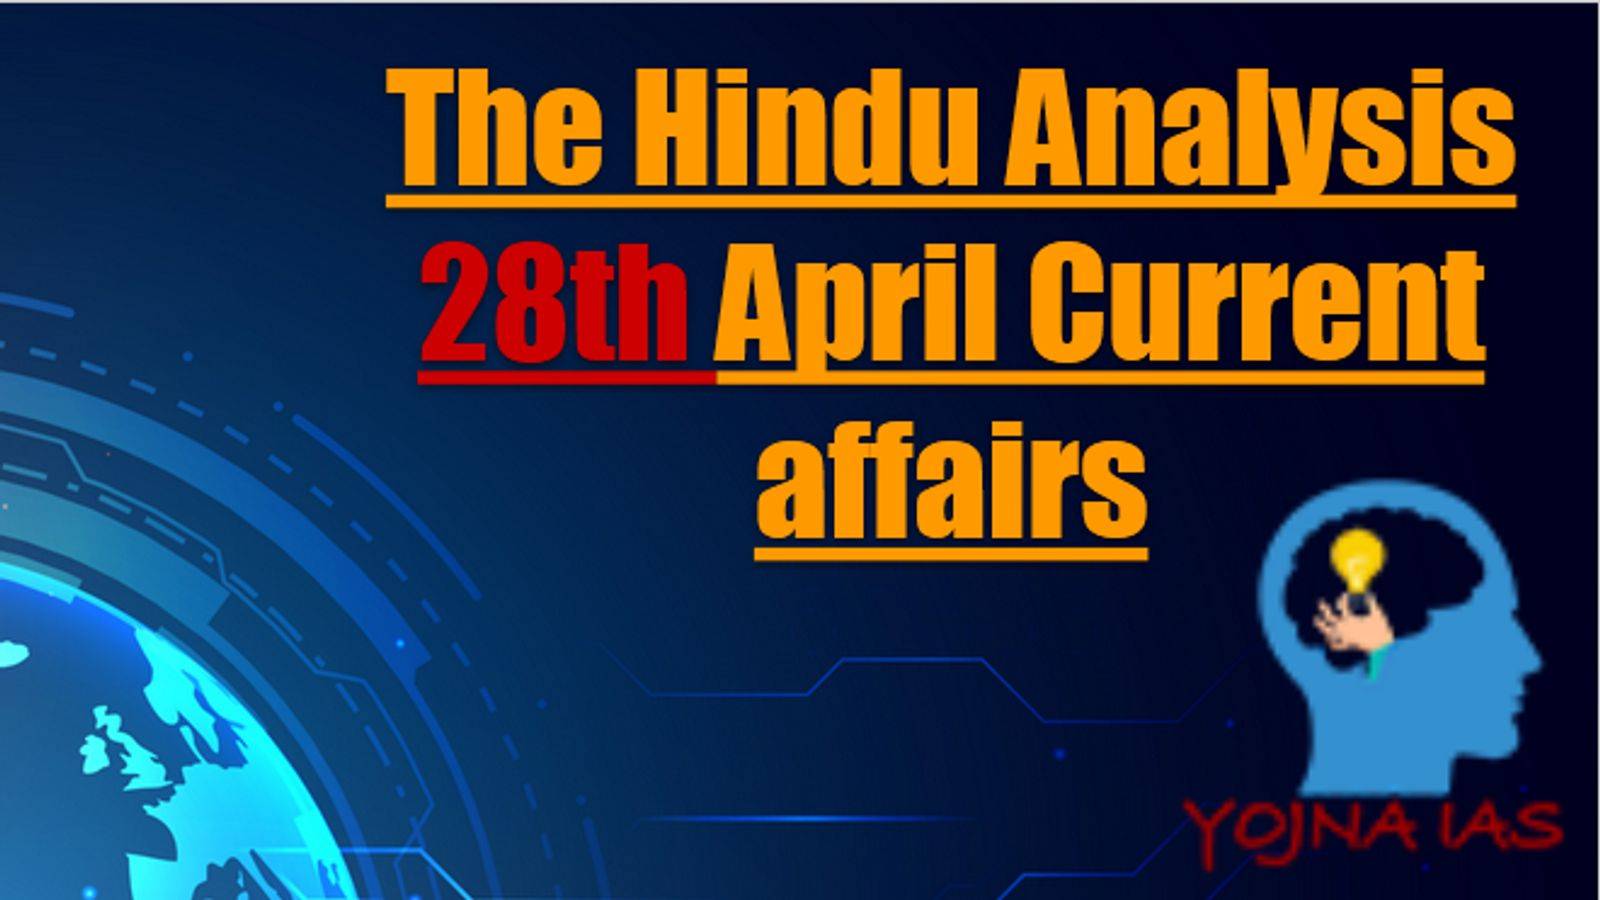 Today Current Affairs 28 April